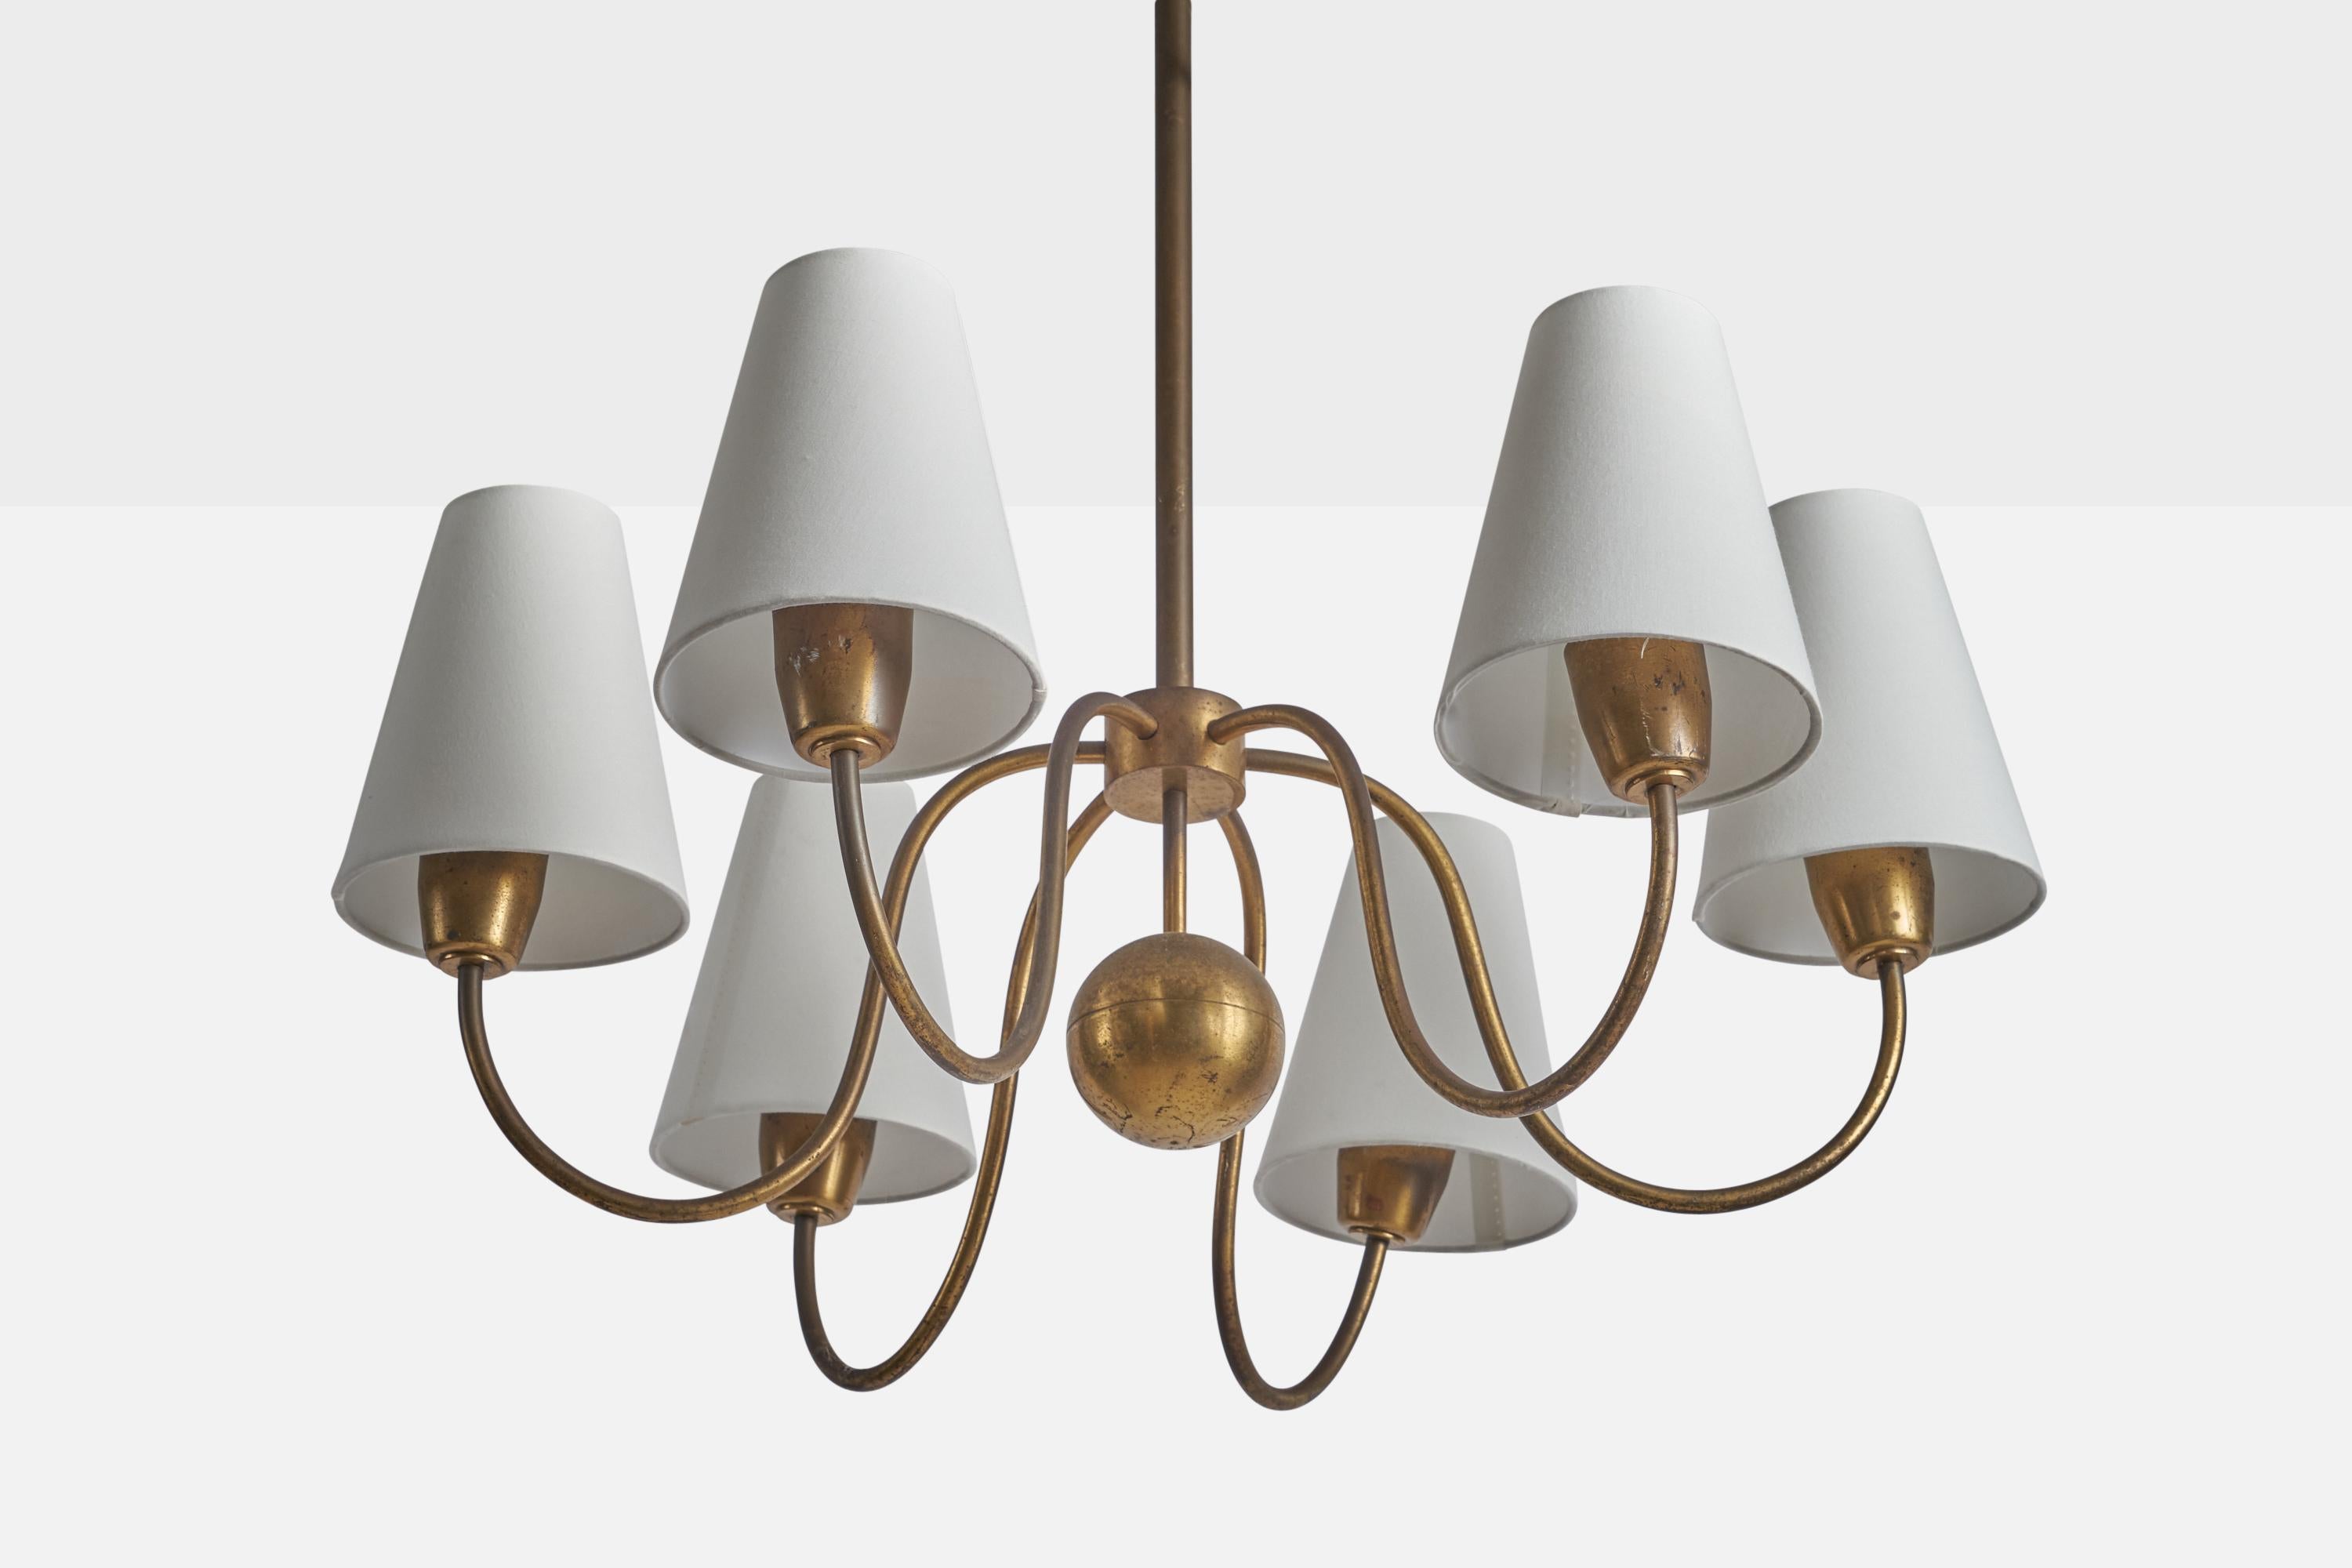 A brass and white fabric chandelier attributed to Hans Bergström for Ateljé Lyktan, Sweden, 1940s.

Overall Dimensions (inches): 23.25” H x 26.5” Diameter
Bulb Specifications: E-26 Bulb
Number of Sockets: 6
All lighting will be converted for US